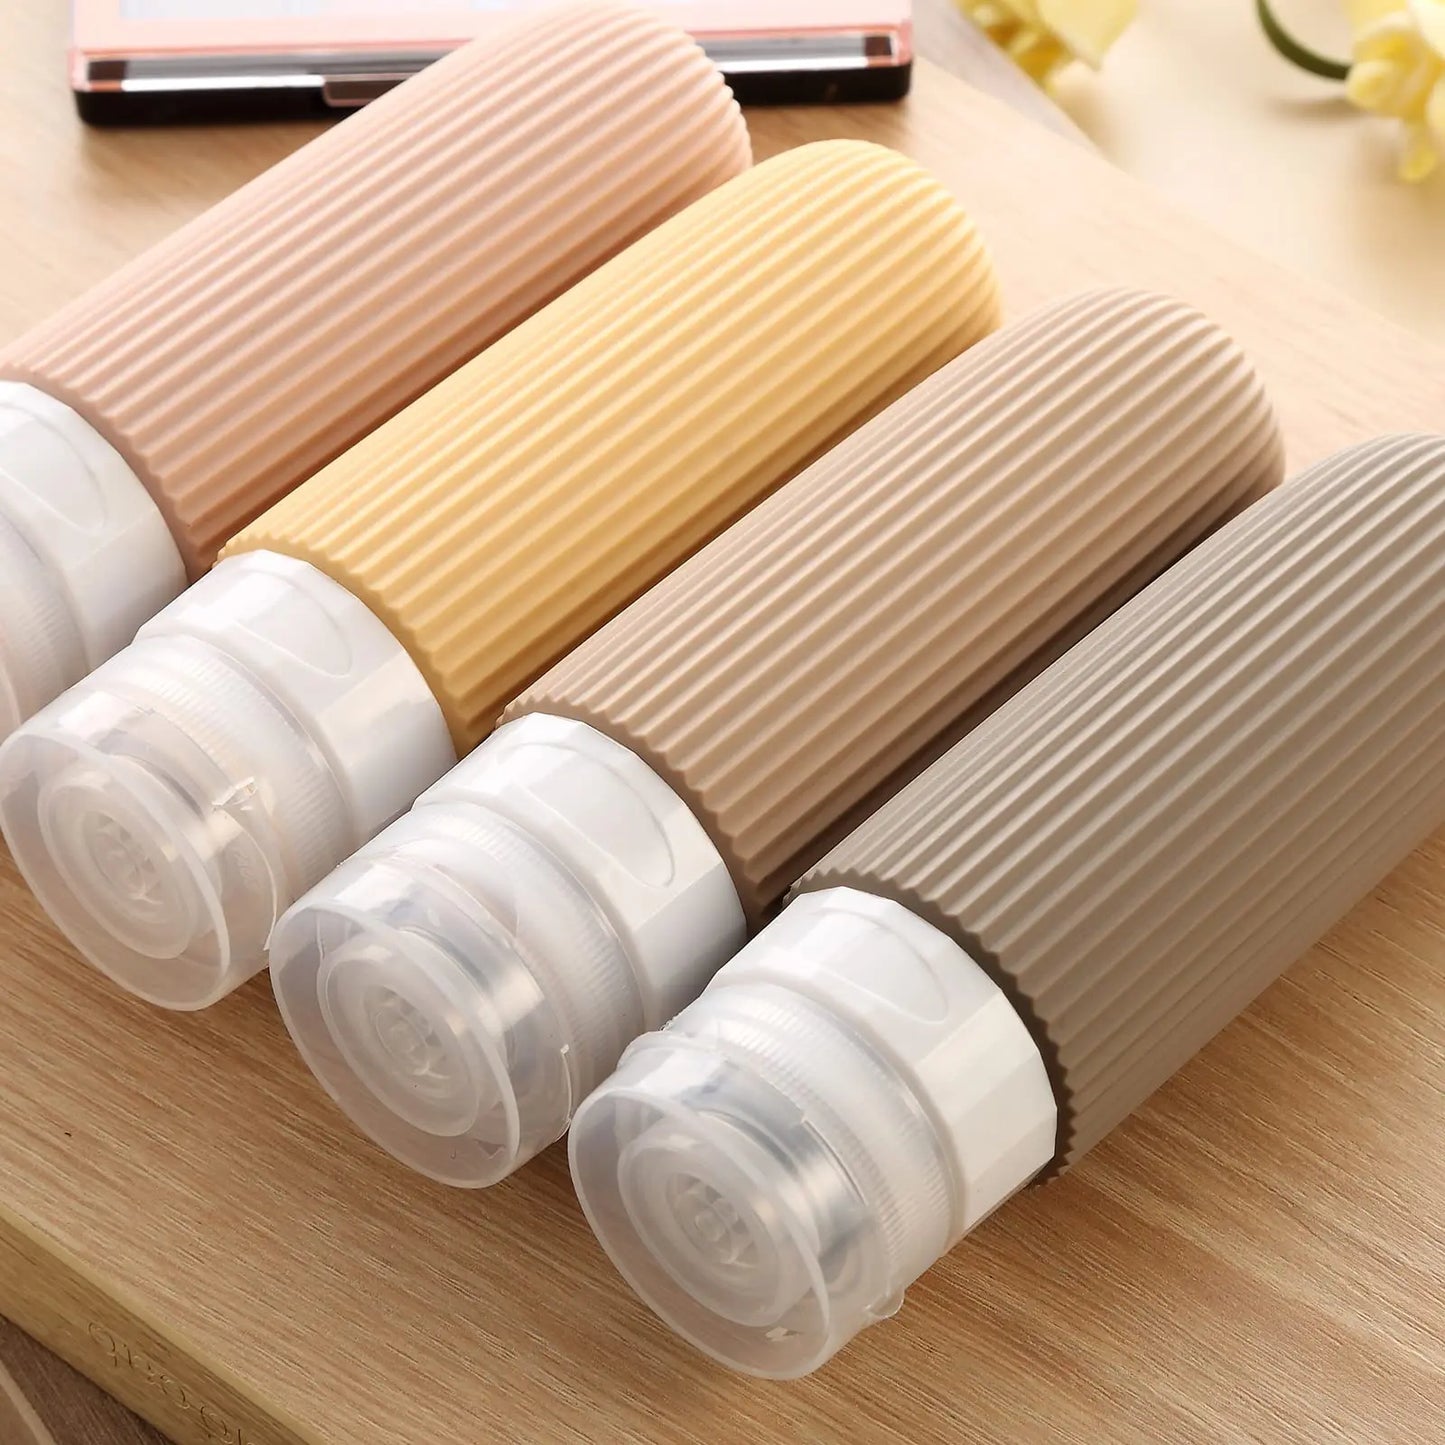 Silicone Travel Bottles Accessories